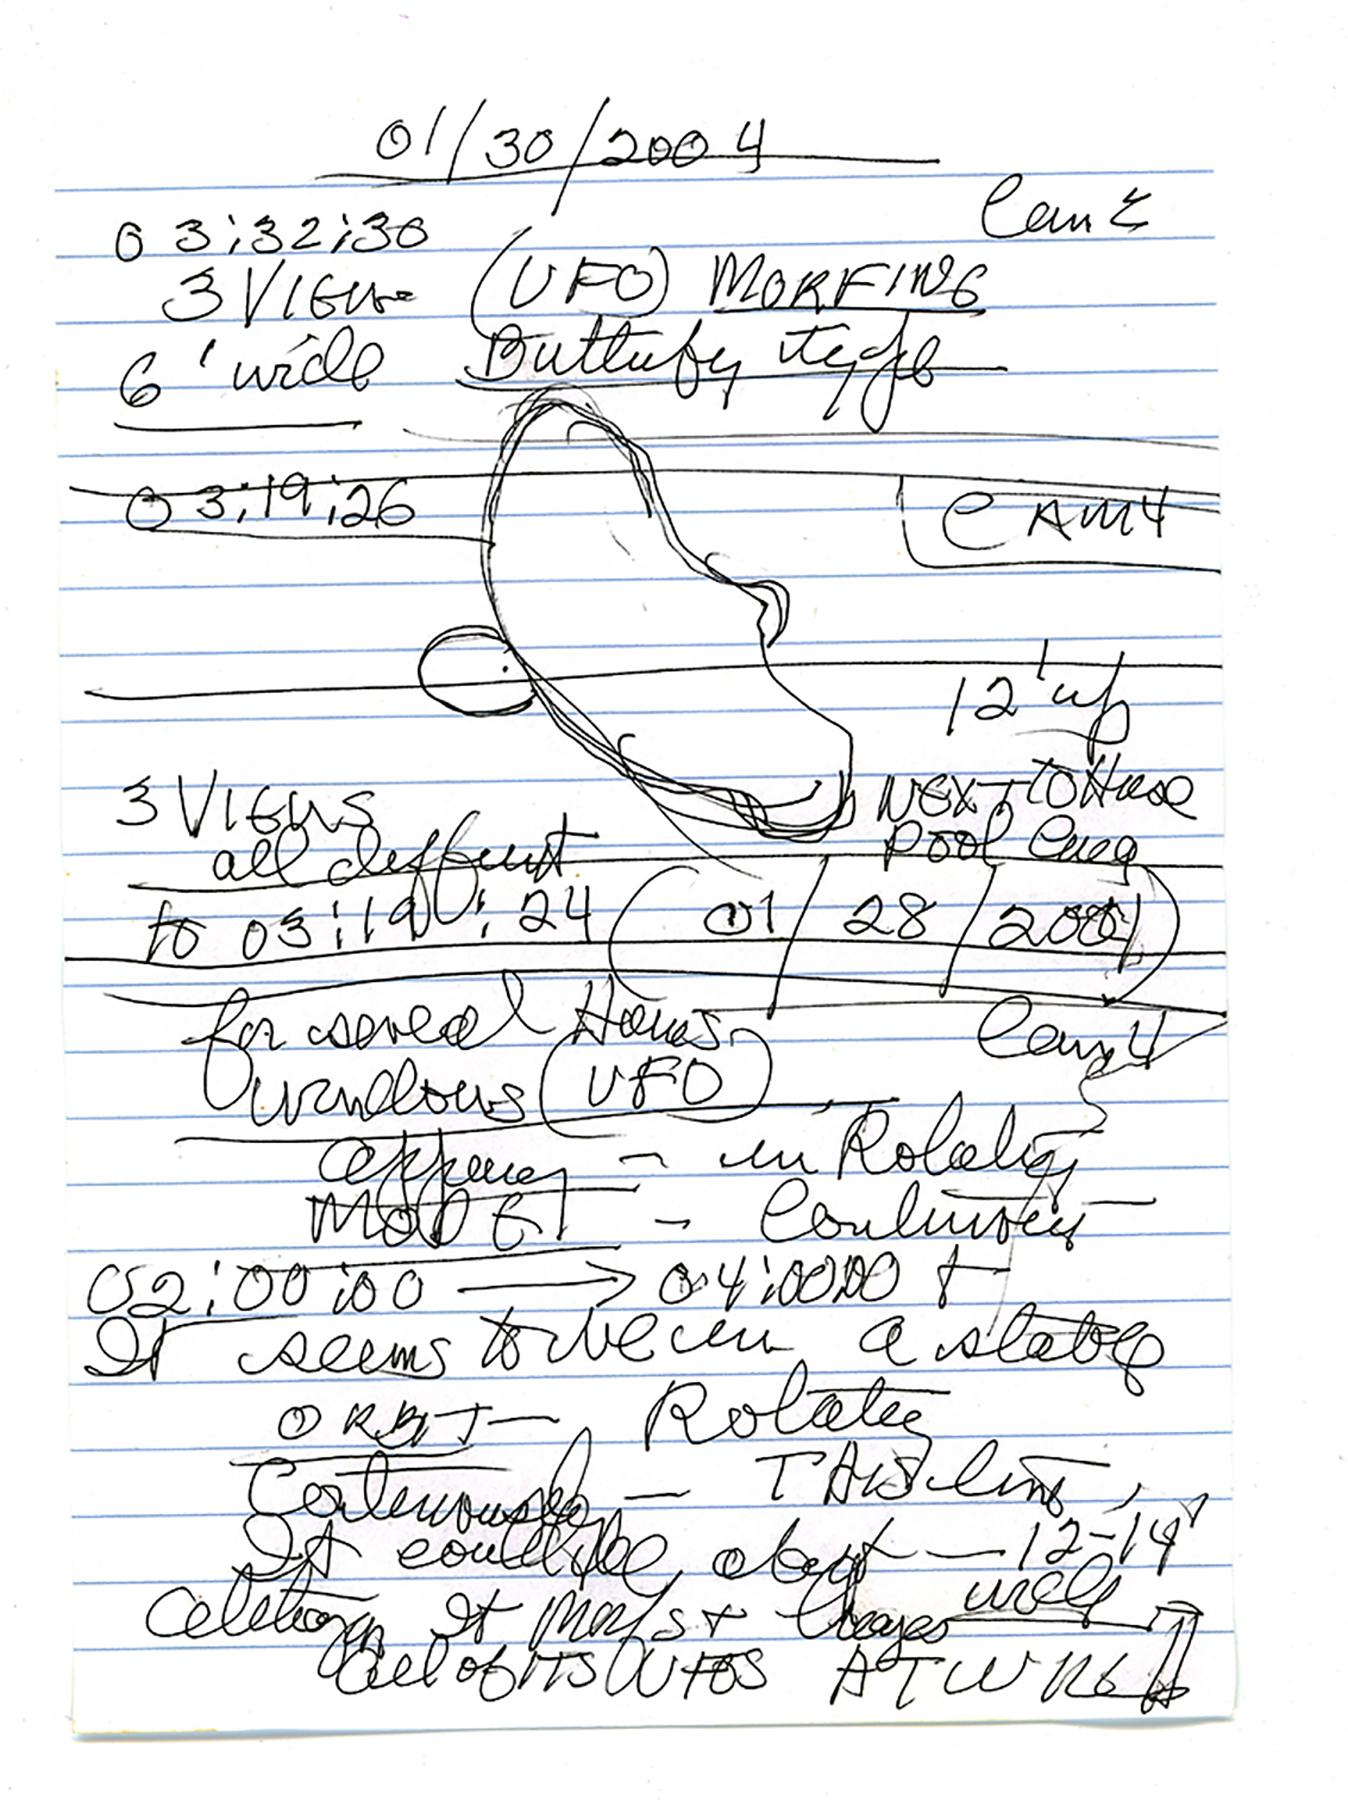 UFO Morphing, UFO Notebook, January 30 - Photograph by Kali